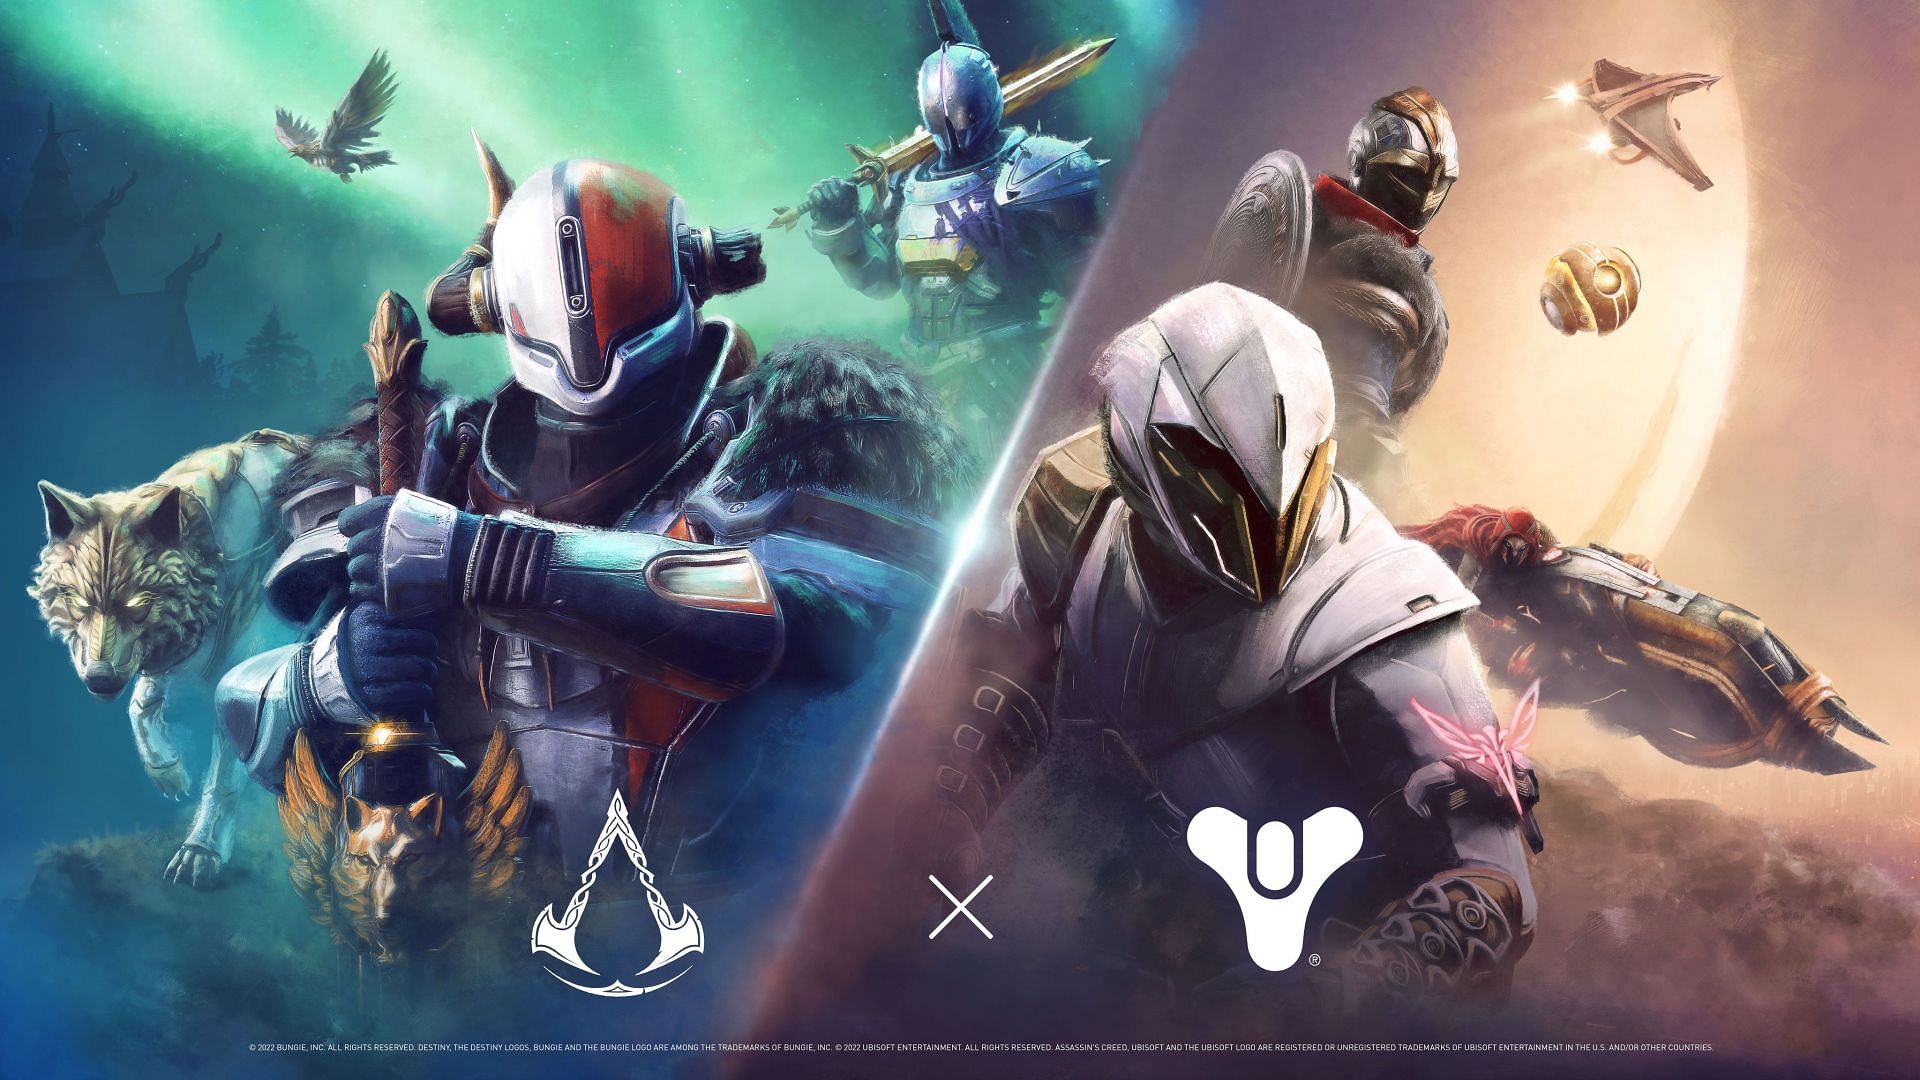 A new collaboration will soon go live in Destiny 2 (Image via Bungie/Ubisoft)